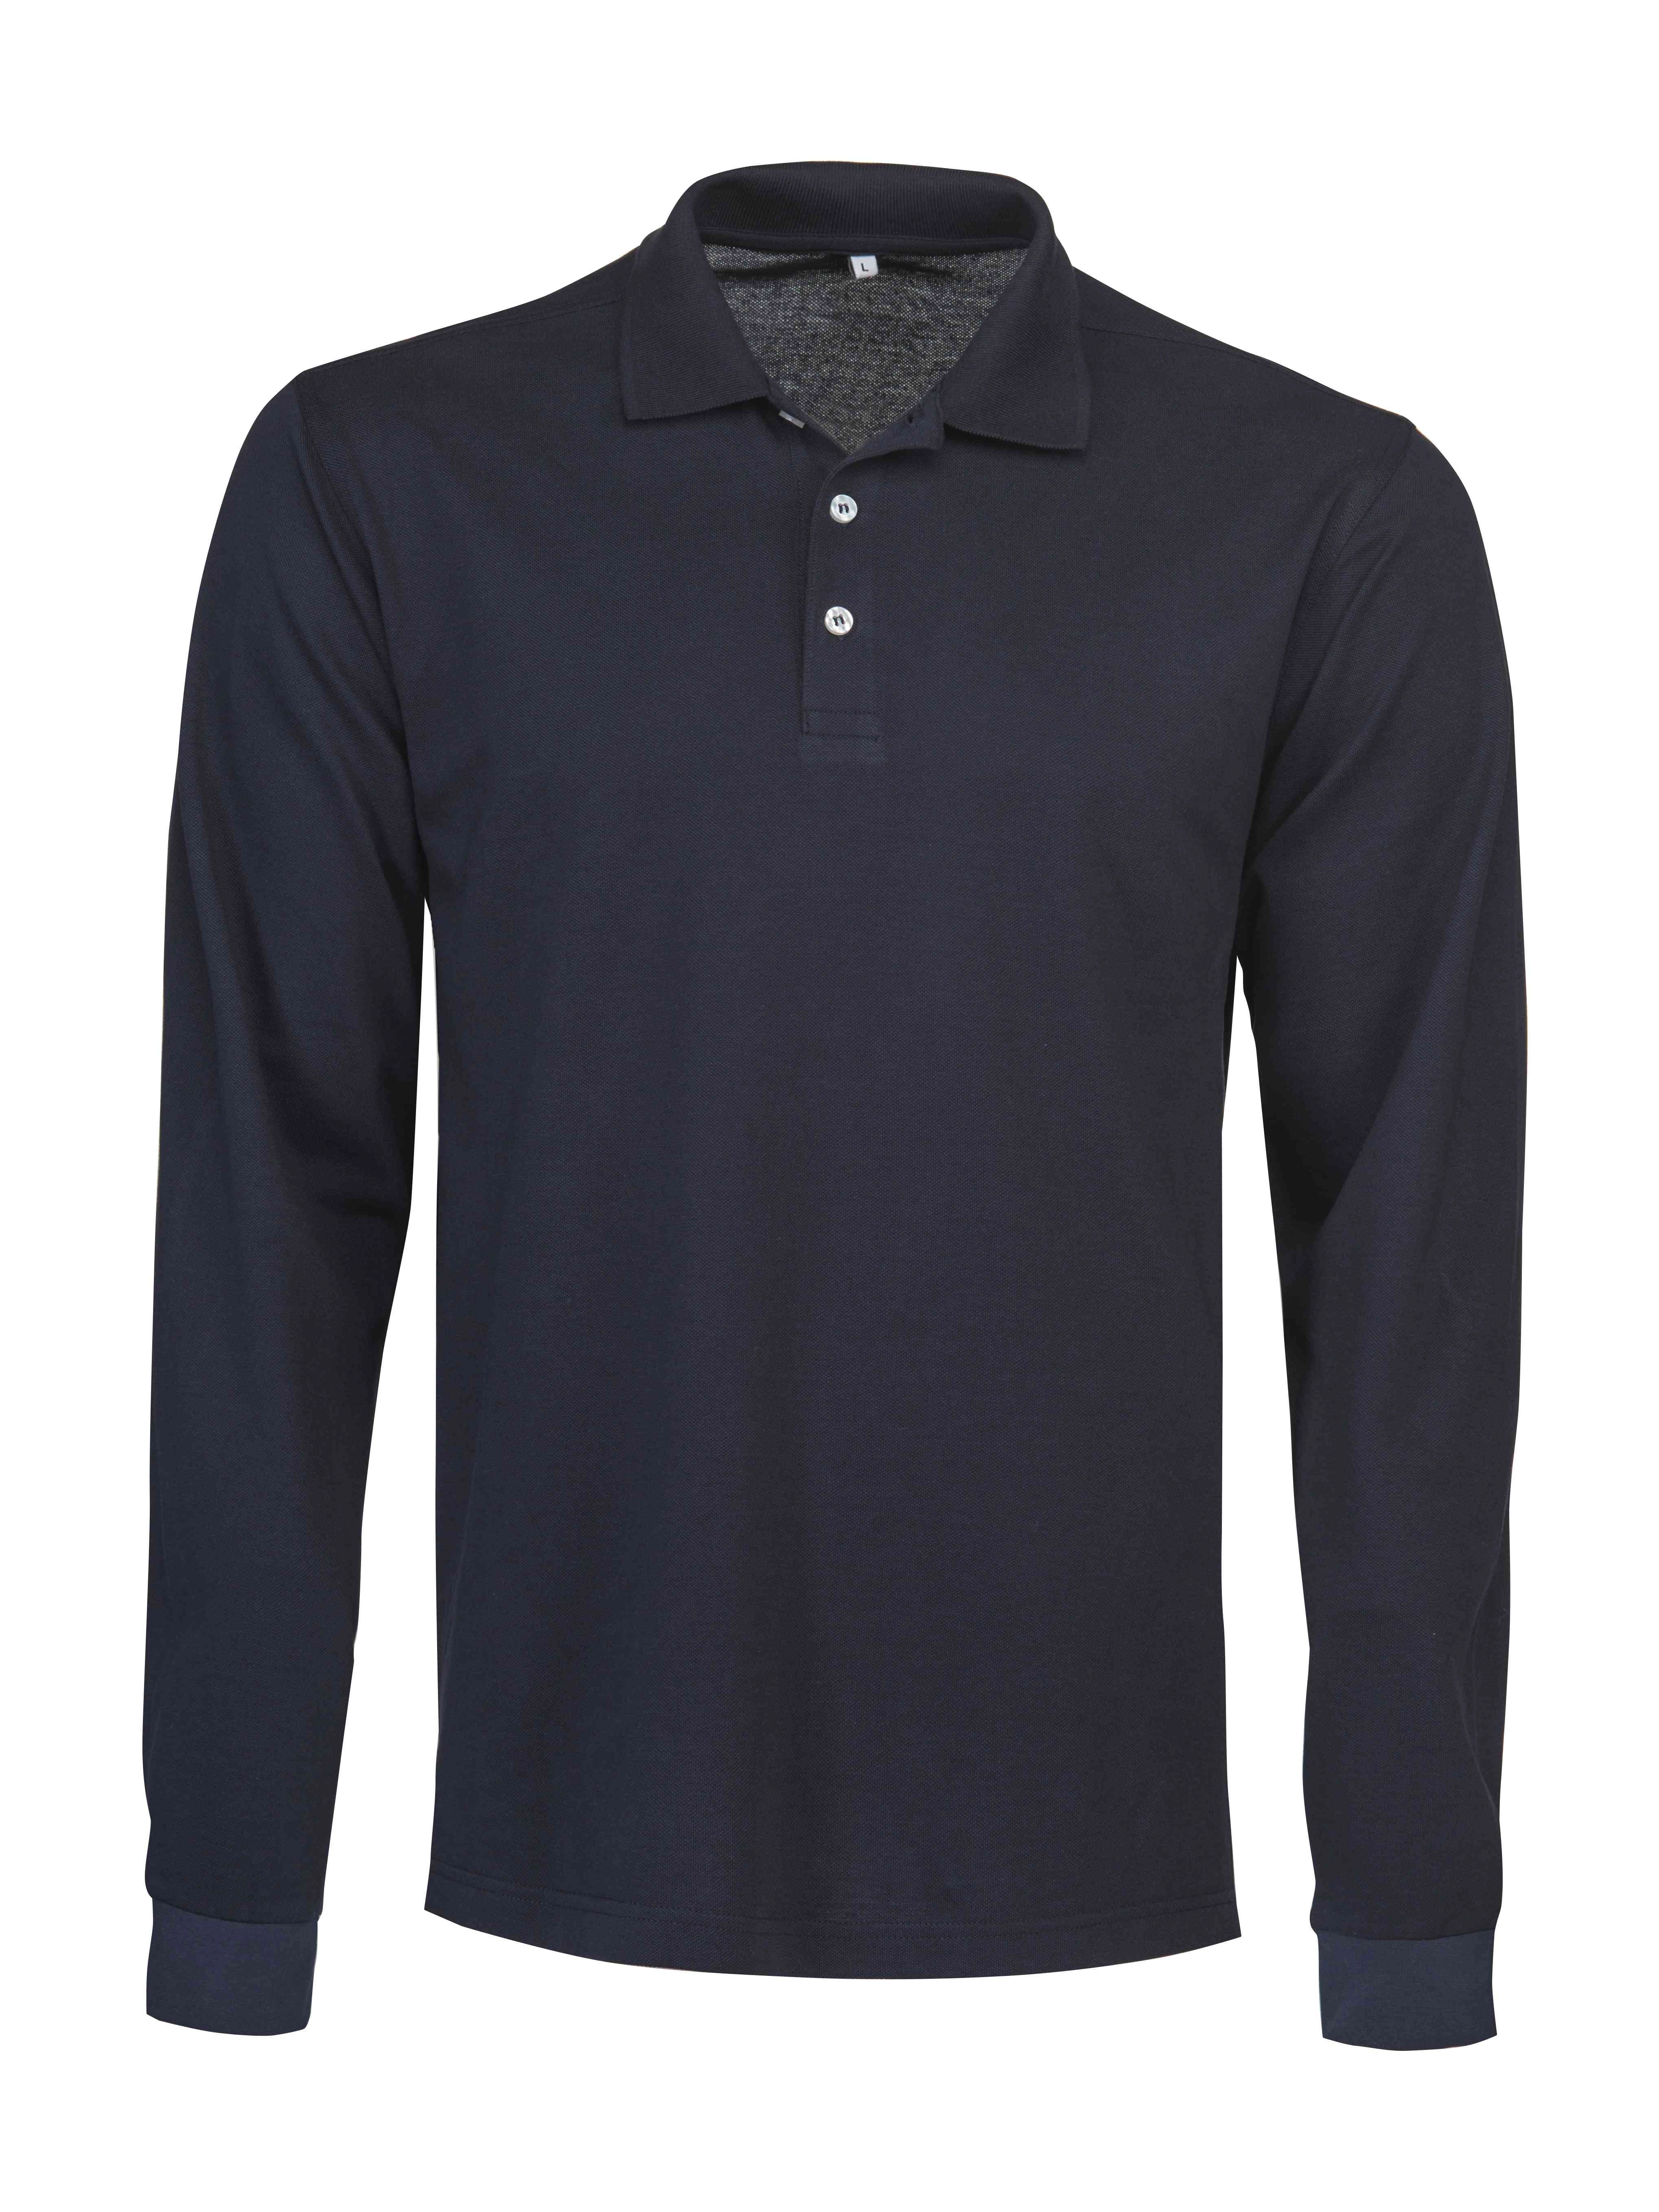 SURF POLO RSX L/S NAVY PE-2265011-600-4